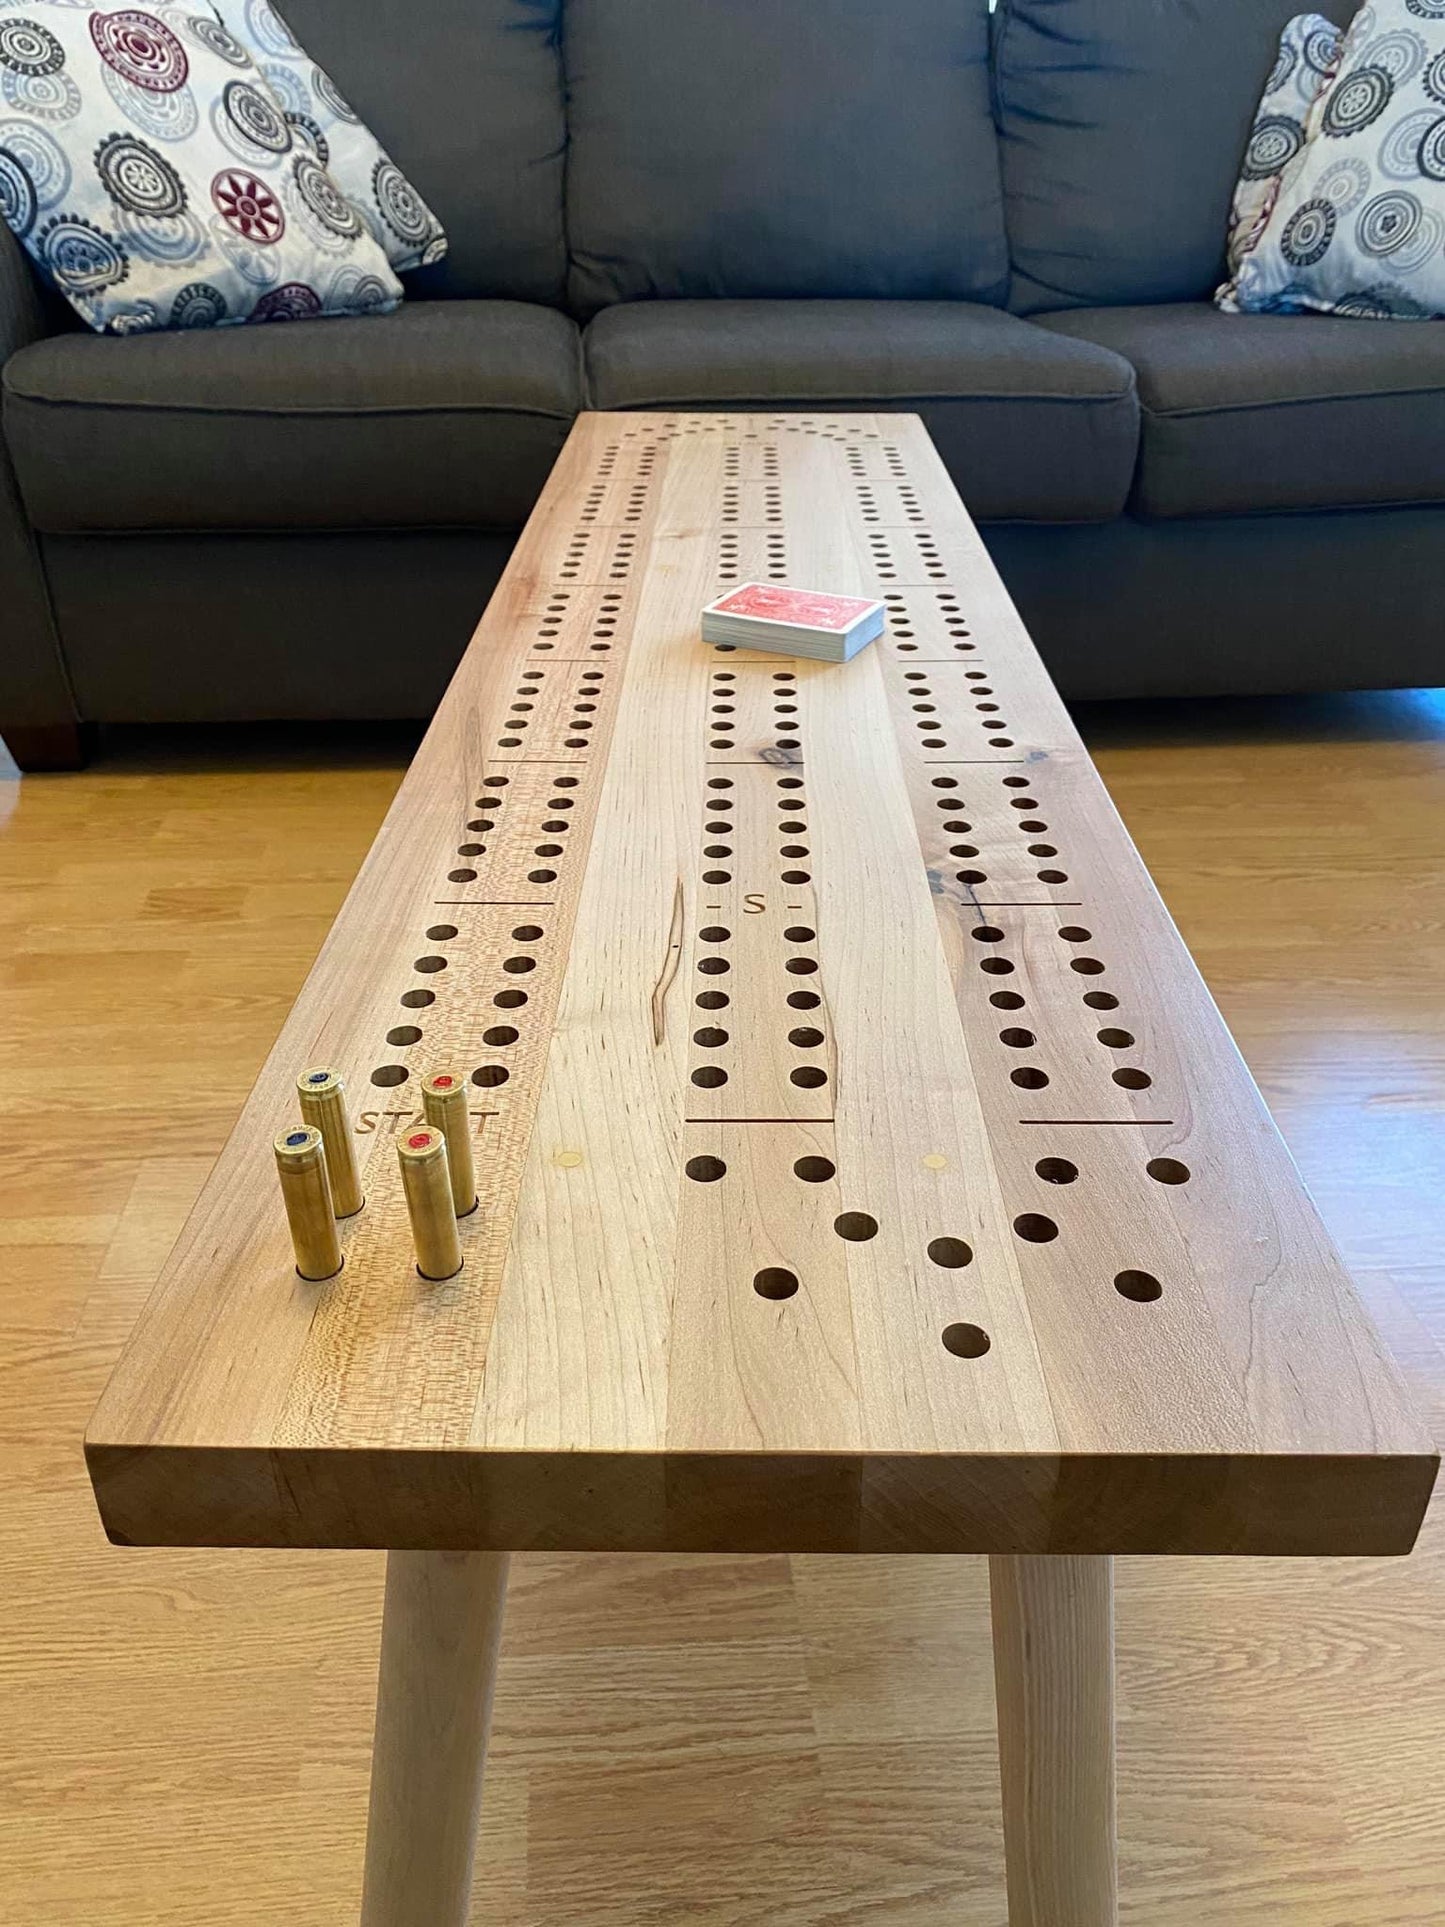 Big Cribbage Board with Rifle Shell Pegs